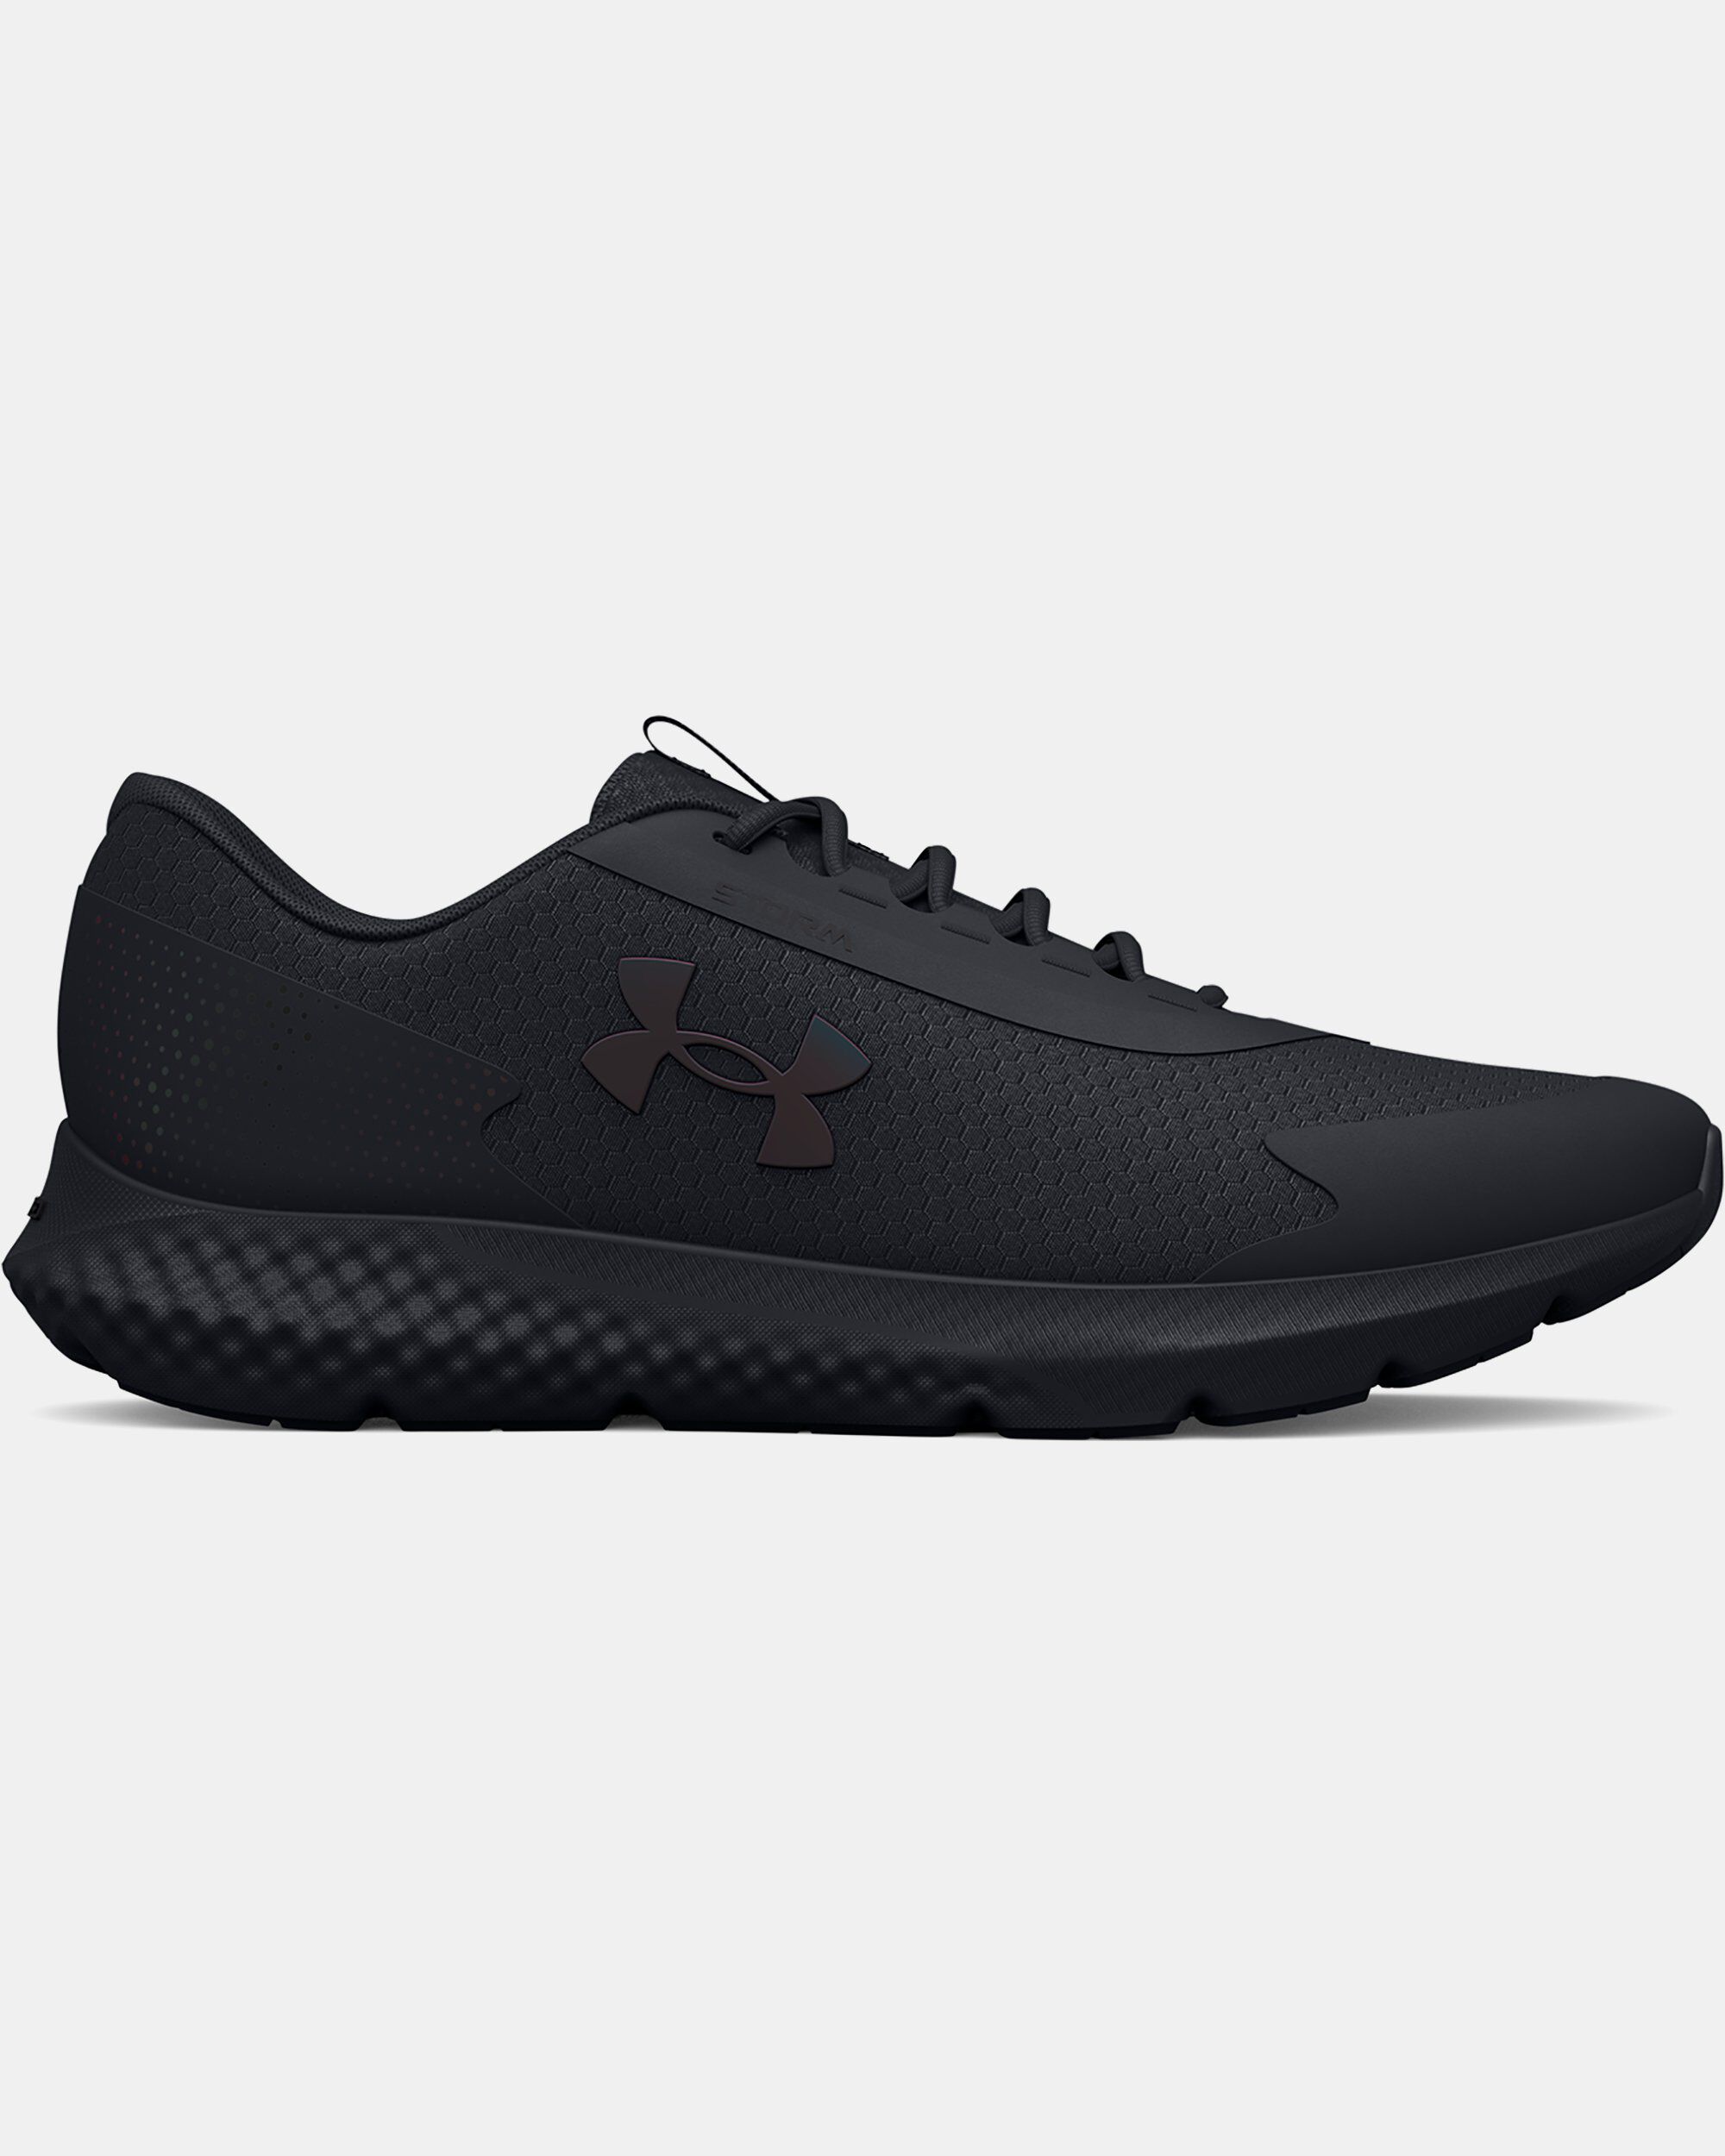 Sapatos de mulher running femme Under Armour Charged Rogue 3